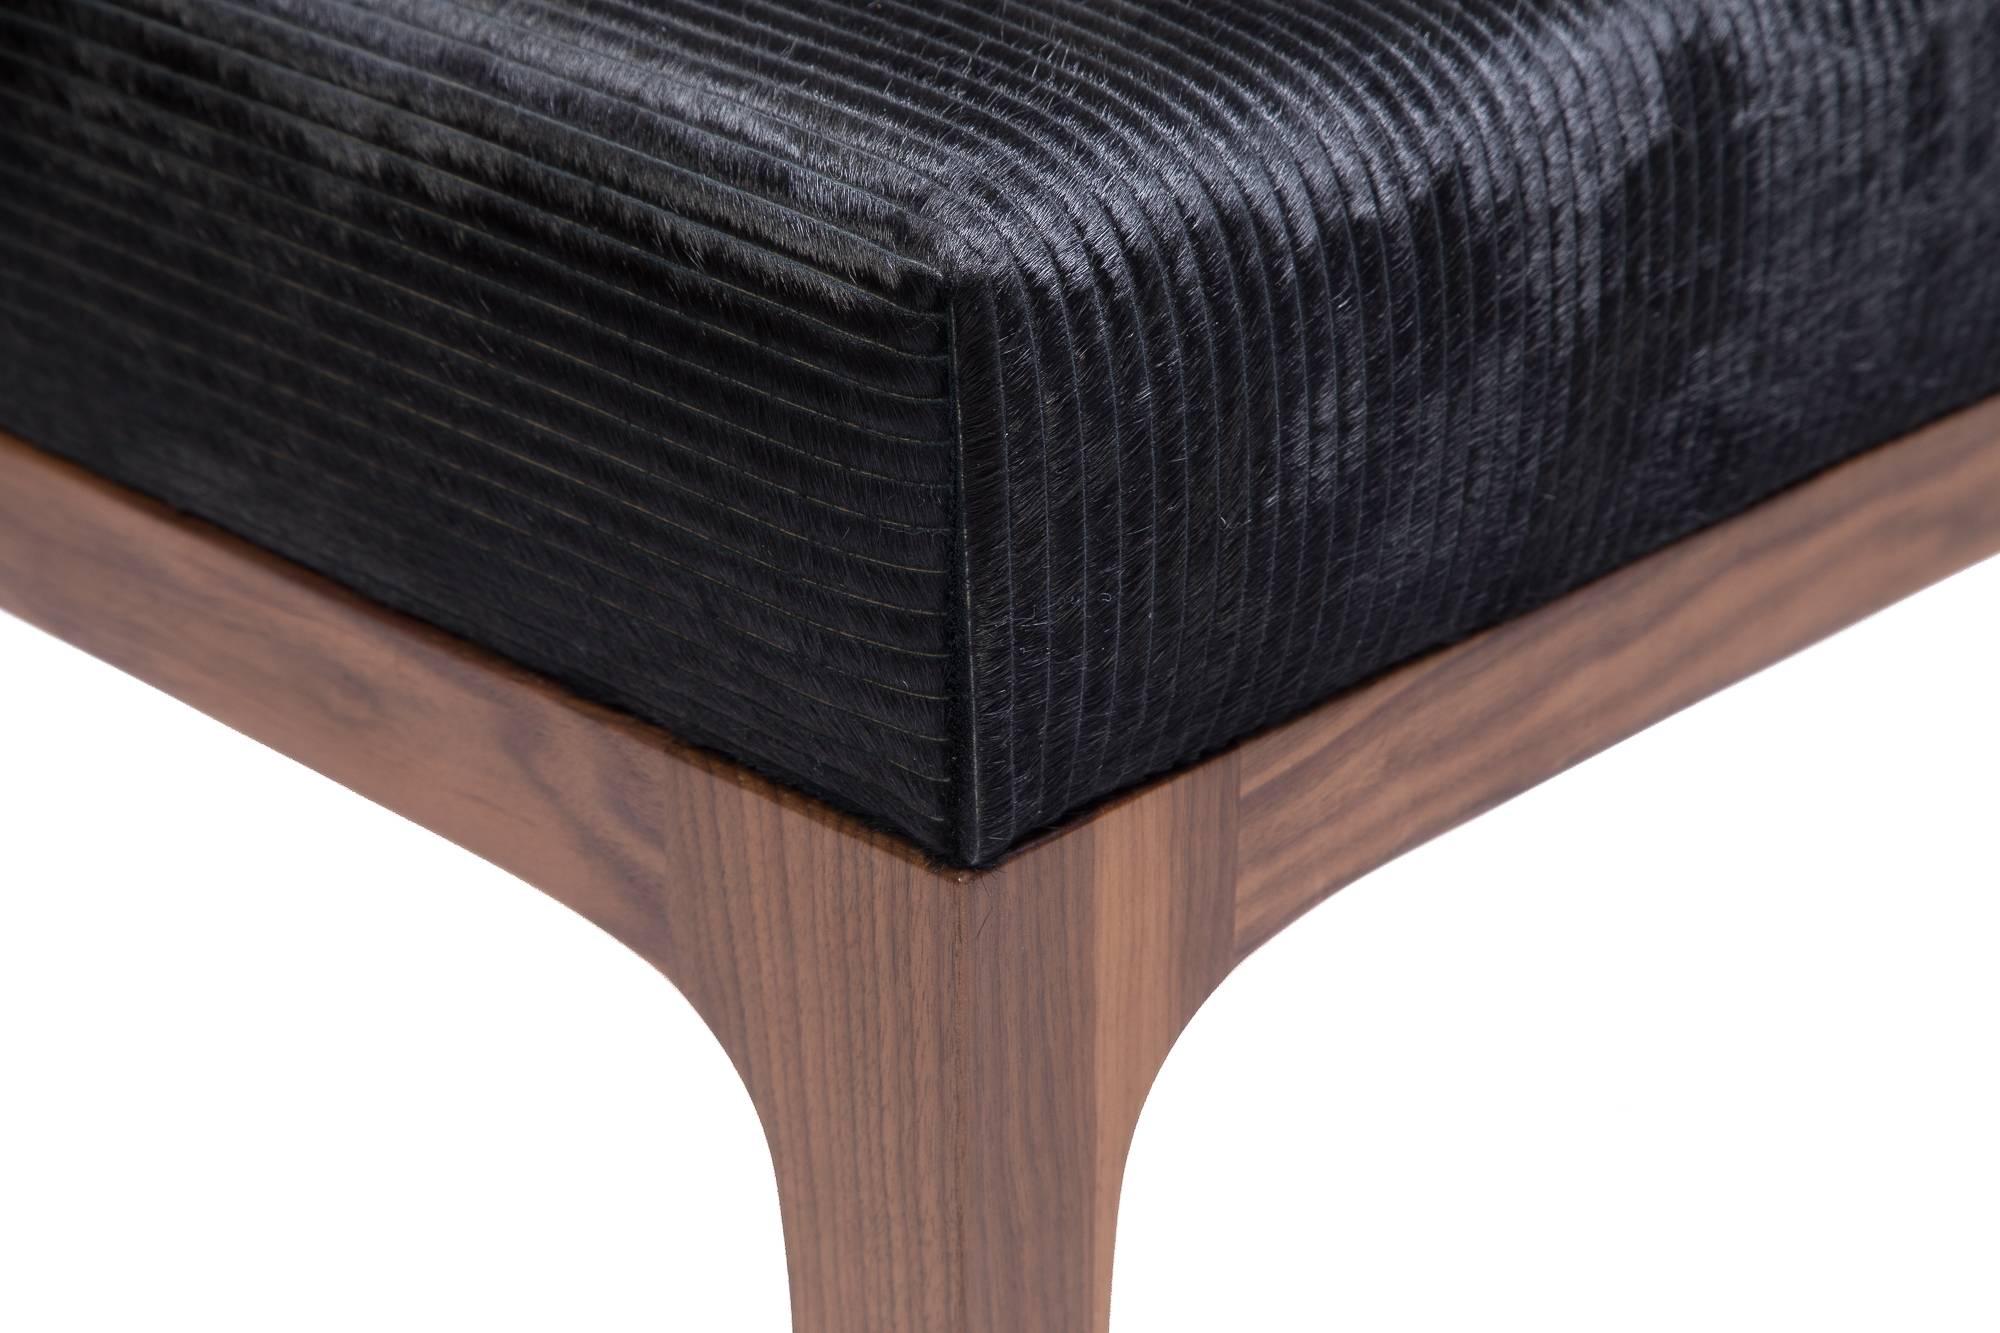 The Raphael walnut Ottomans by KLASP home.
Pair of Mid-Century Modern style with a laser cut pattern black cowhide upholstered ottomans, sold as a pair.
Laser cut stripe pattern cowhide in black.
Sold as a pair.
Normandy cowhide.
Mid-Century Modern